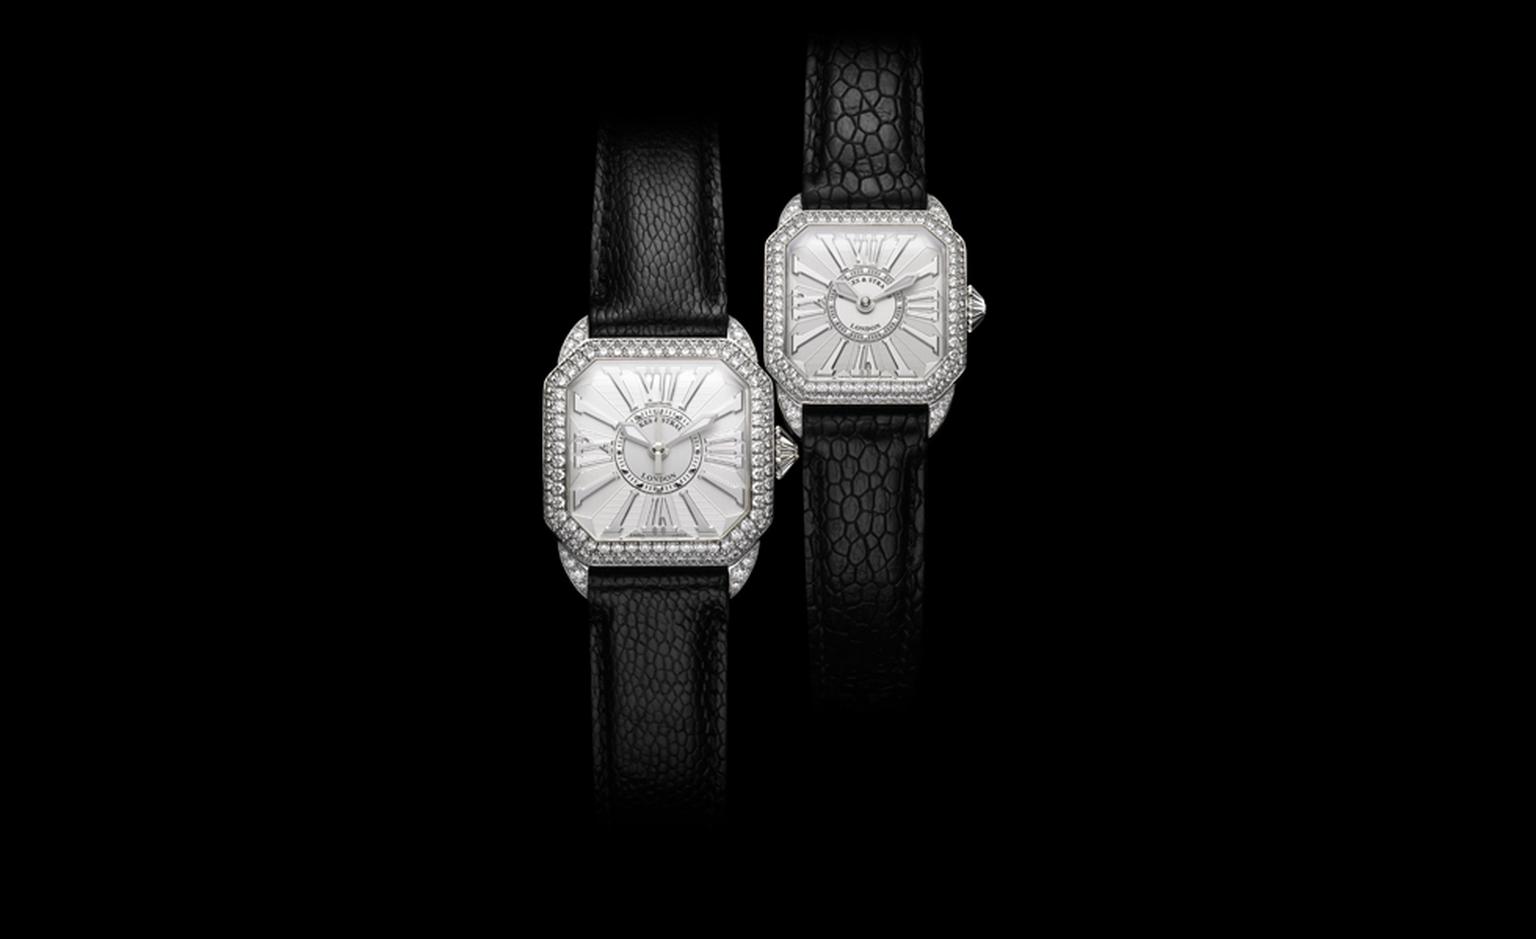 Backes & Strauss, pair of Berkeley watches in white gold. The white dial with white gold Roman numerals has 125  diamonds (2.39 carats). Price: £20,255. The second watch (behind) has 129 diamonds (1.77 carats). Price: £16,130